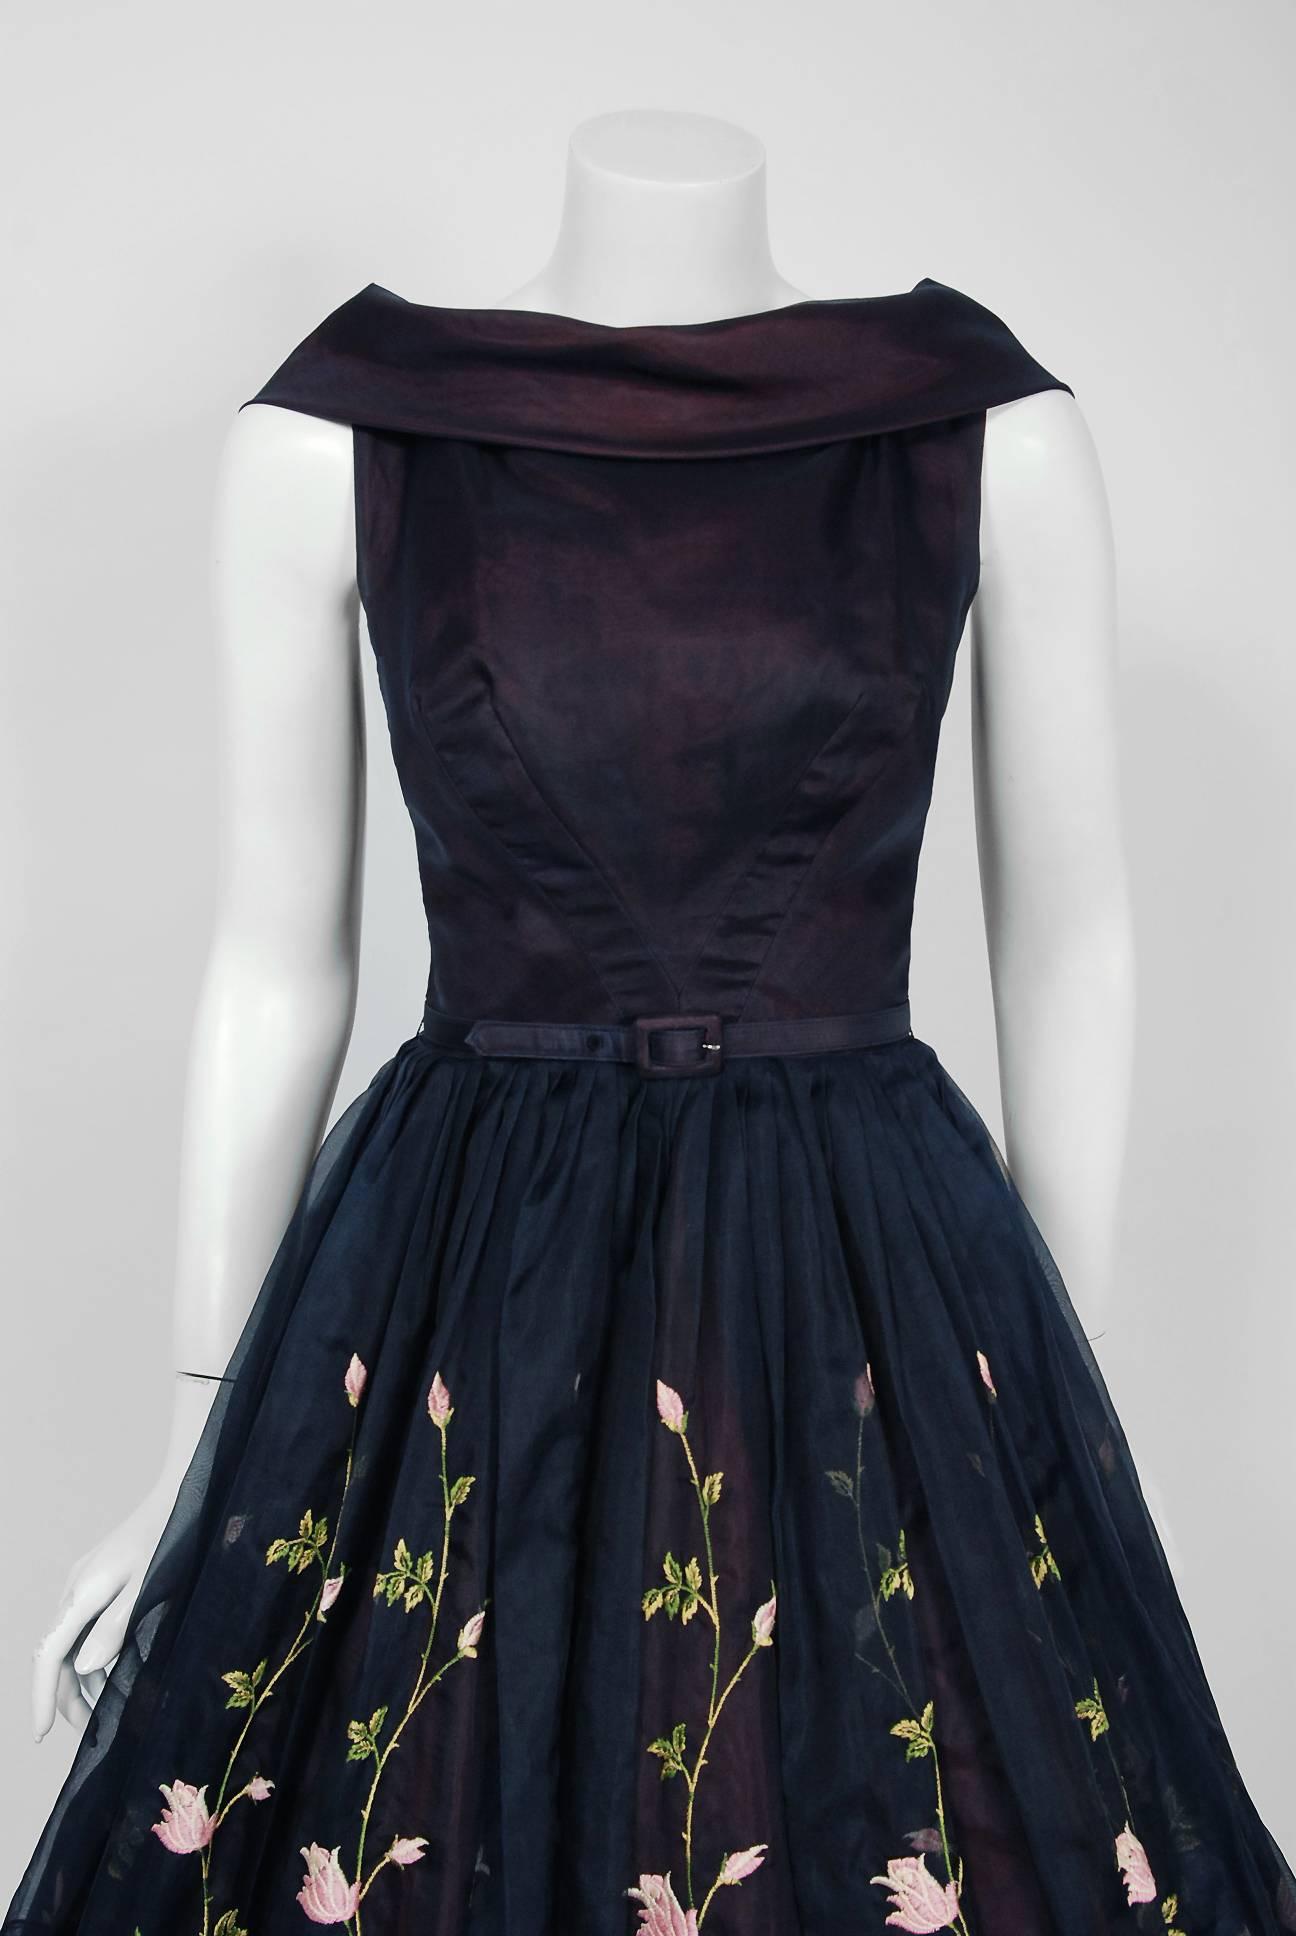 This Claudia Young designer show-stopper is one of the most alluring and flattering 1950's garden party dresses I have ever seen. Fashioned from iridescent navy-blue embroidered silk organza, this creation has everything a woman wants. The bodice